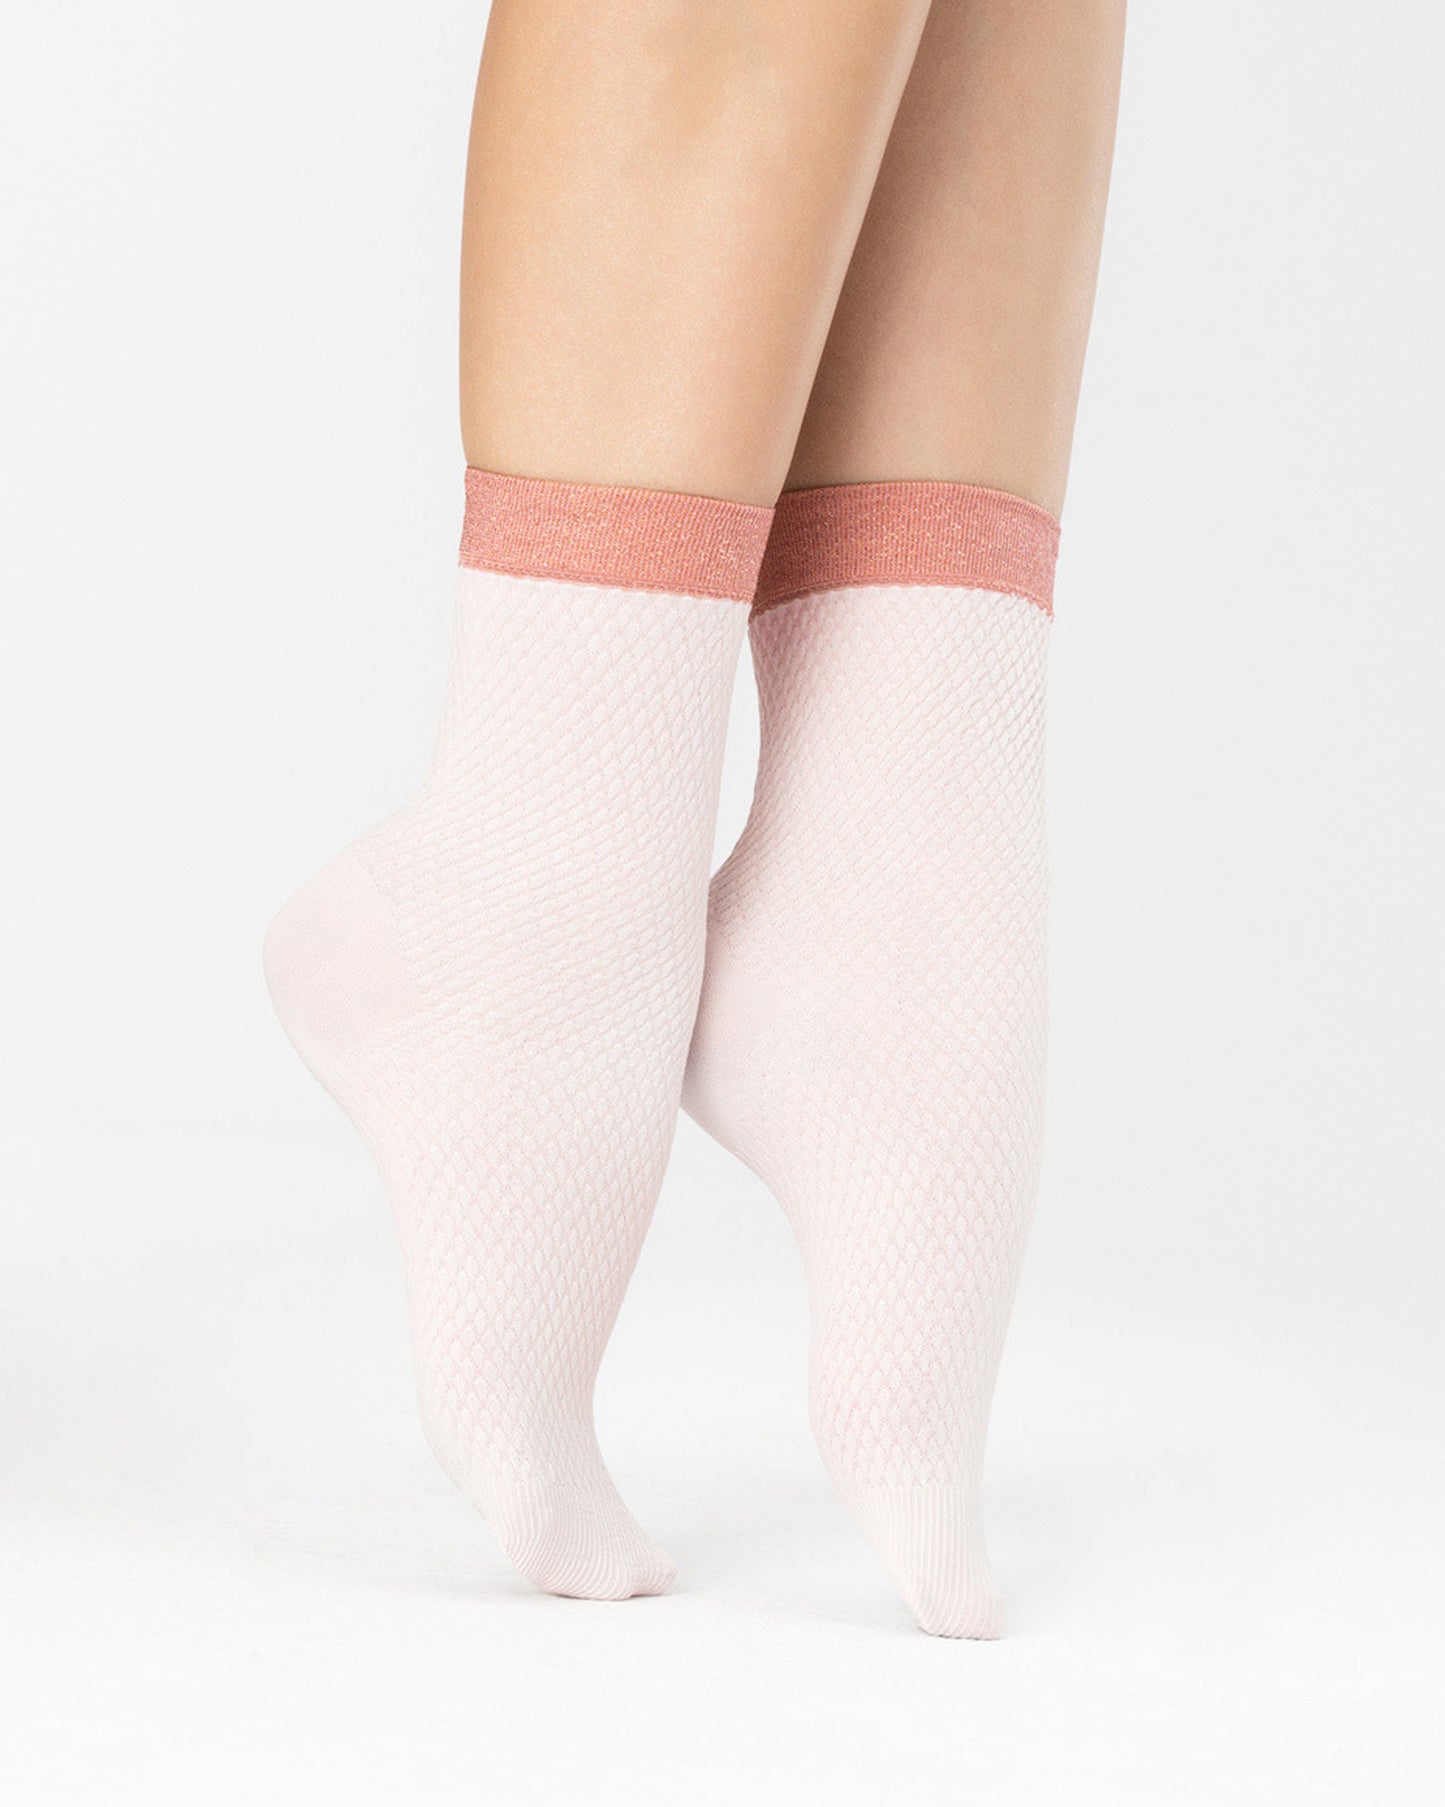 Fiore Biscuit Sock - Pale peach opaque fashion ankle socks with a honeycomb textured pattern, plain heel, striped toe and rose pink gold lurex cuff.